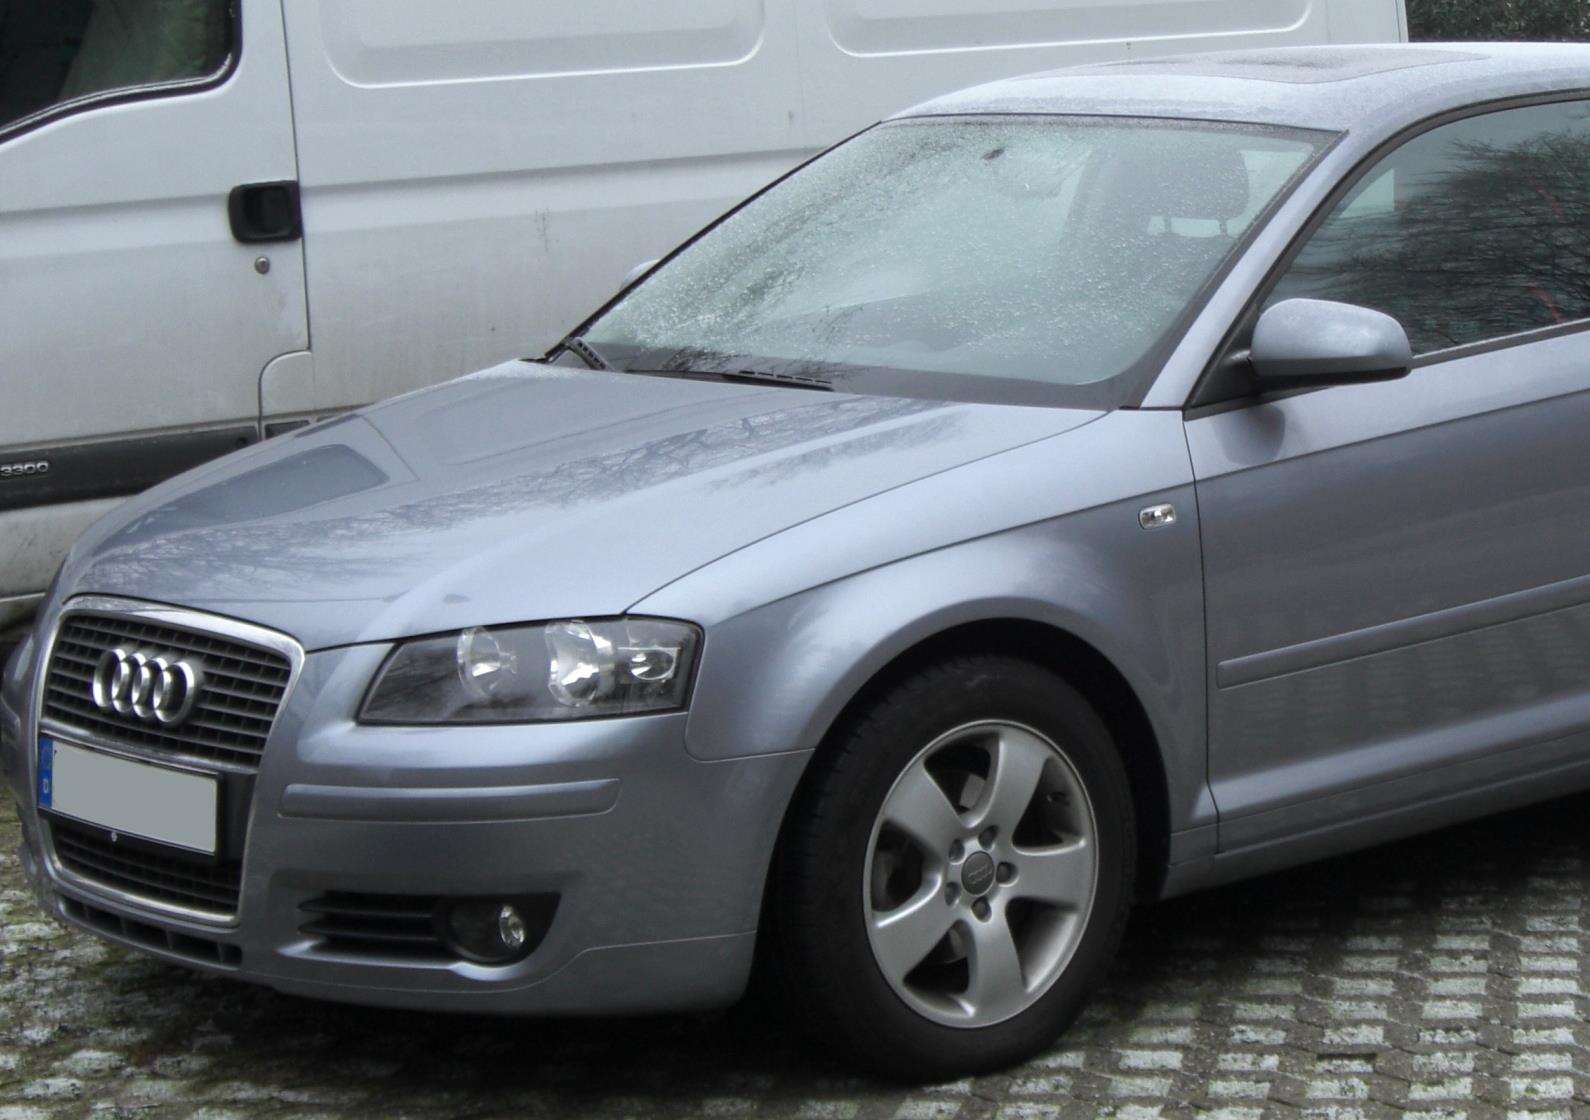 Two Audi A3s are used by council staff